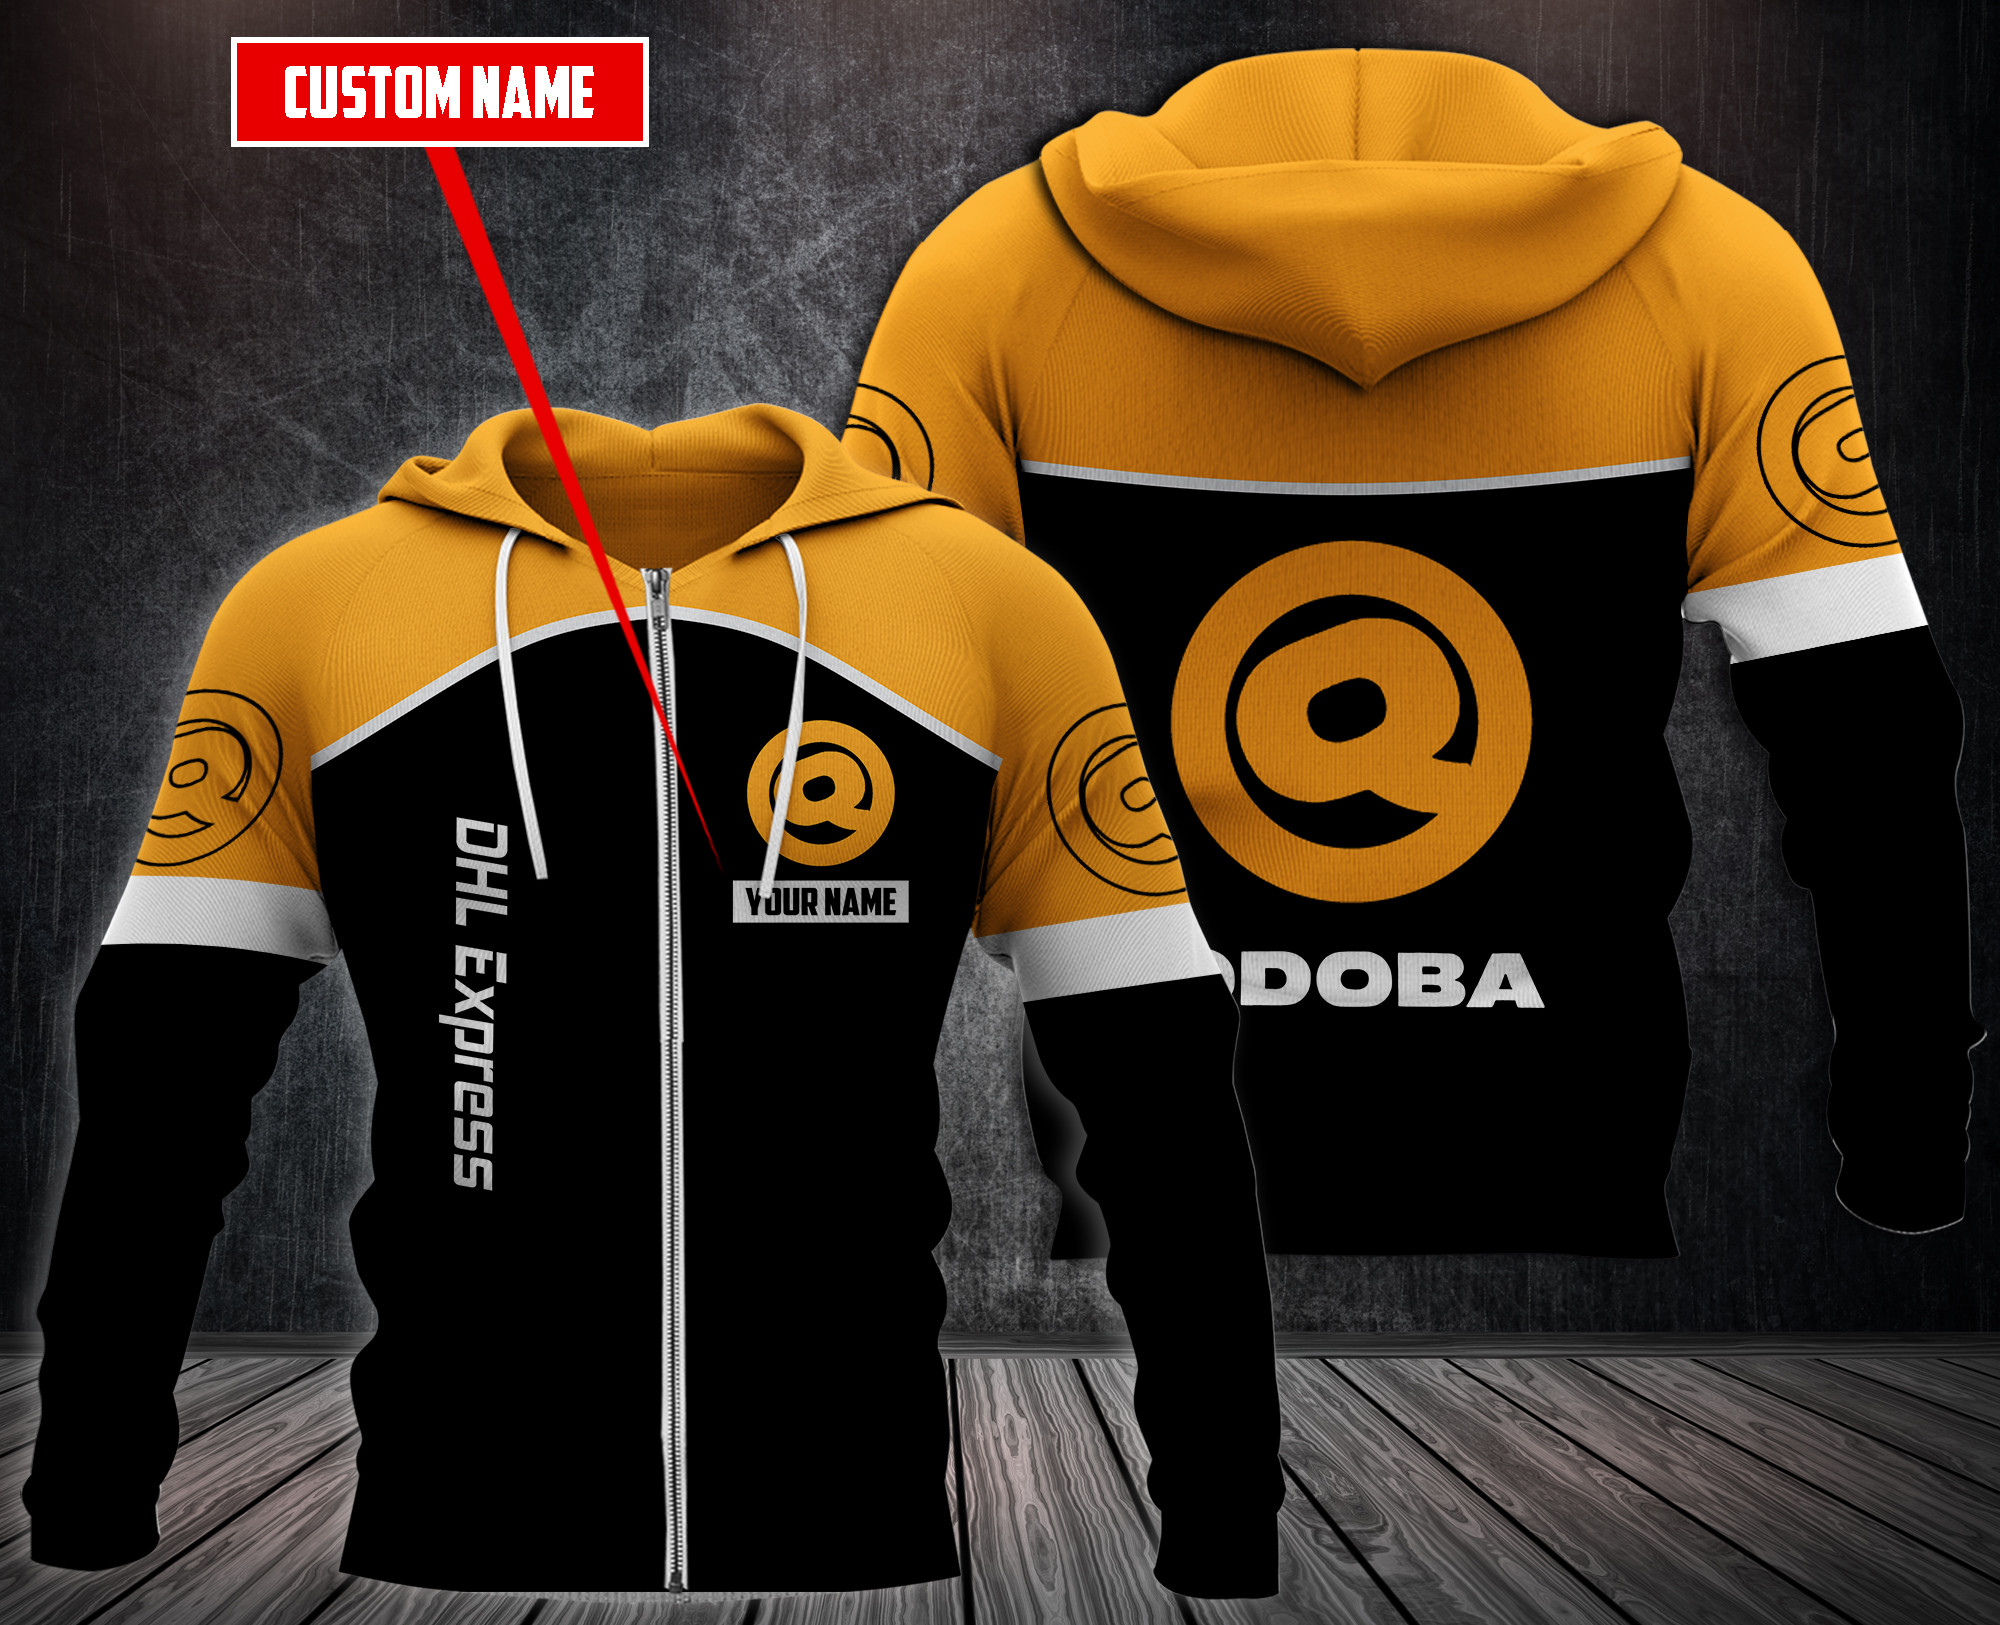 Choose the right hoodies for you on our boxboxshirt and ethershirt websites in 2022 78